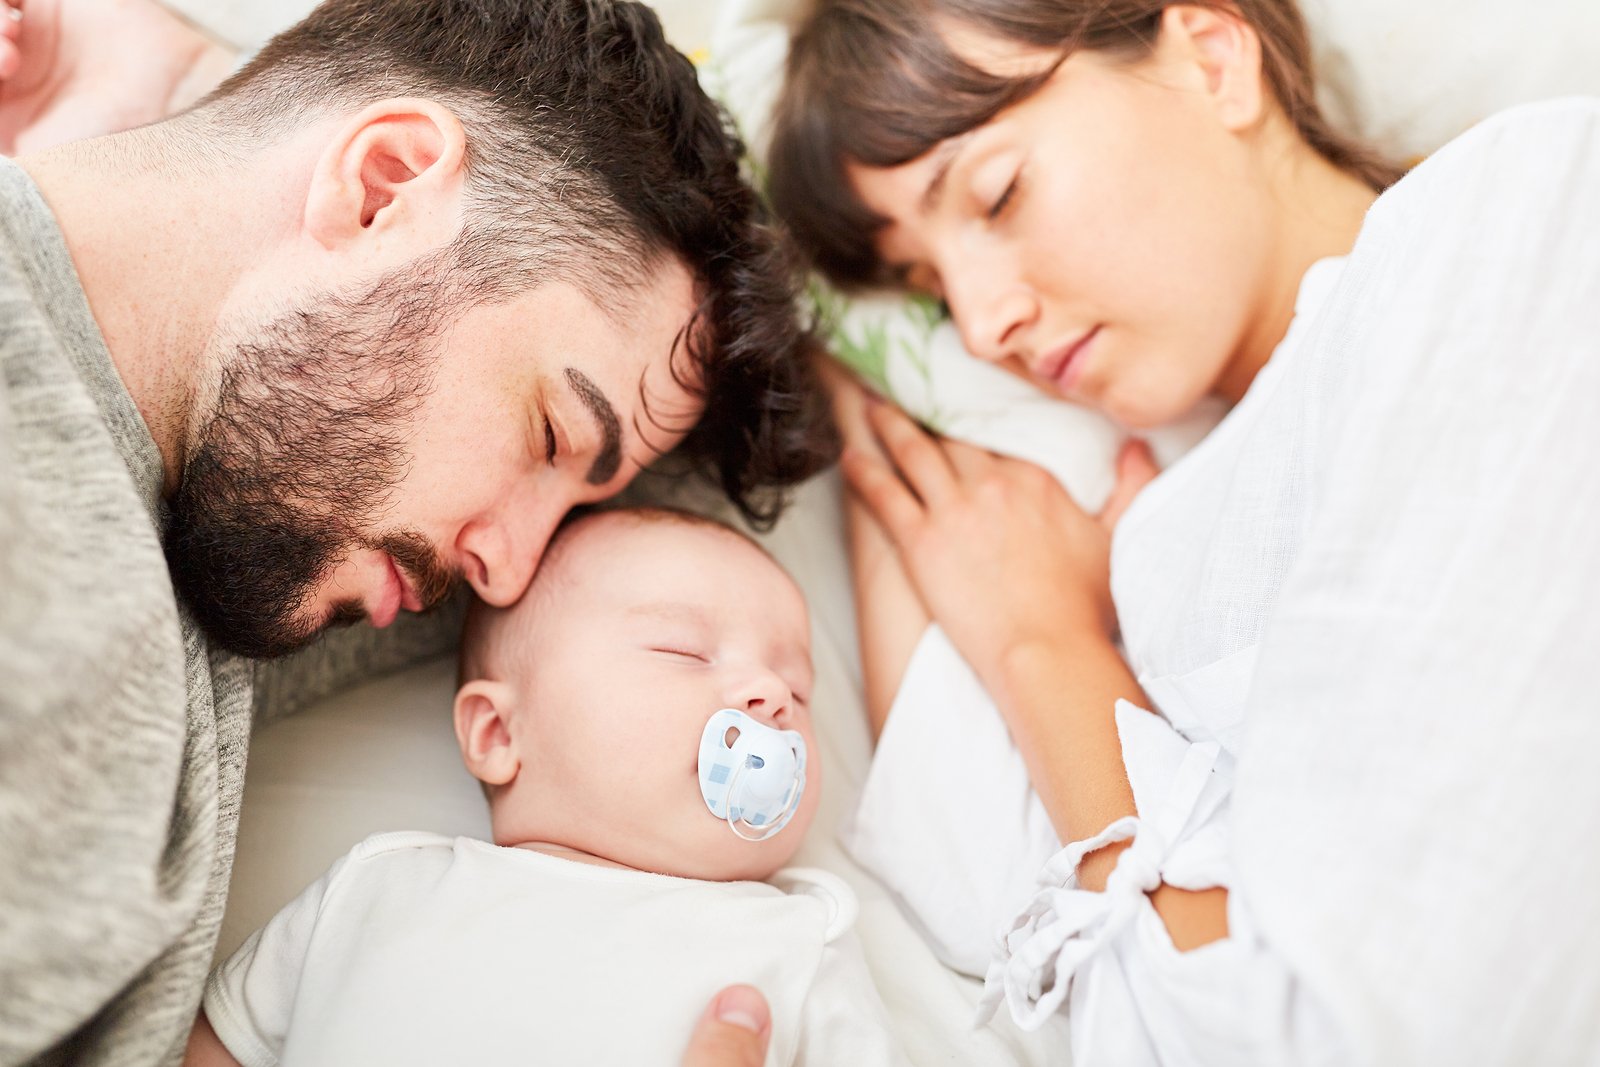 5 Ways to Stop Co-Sleeping & Transition to a Crib